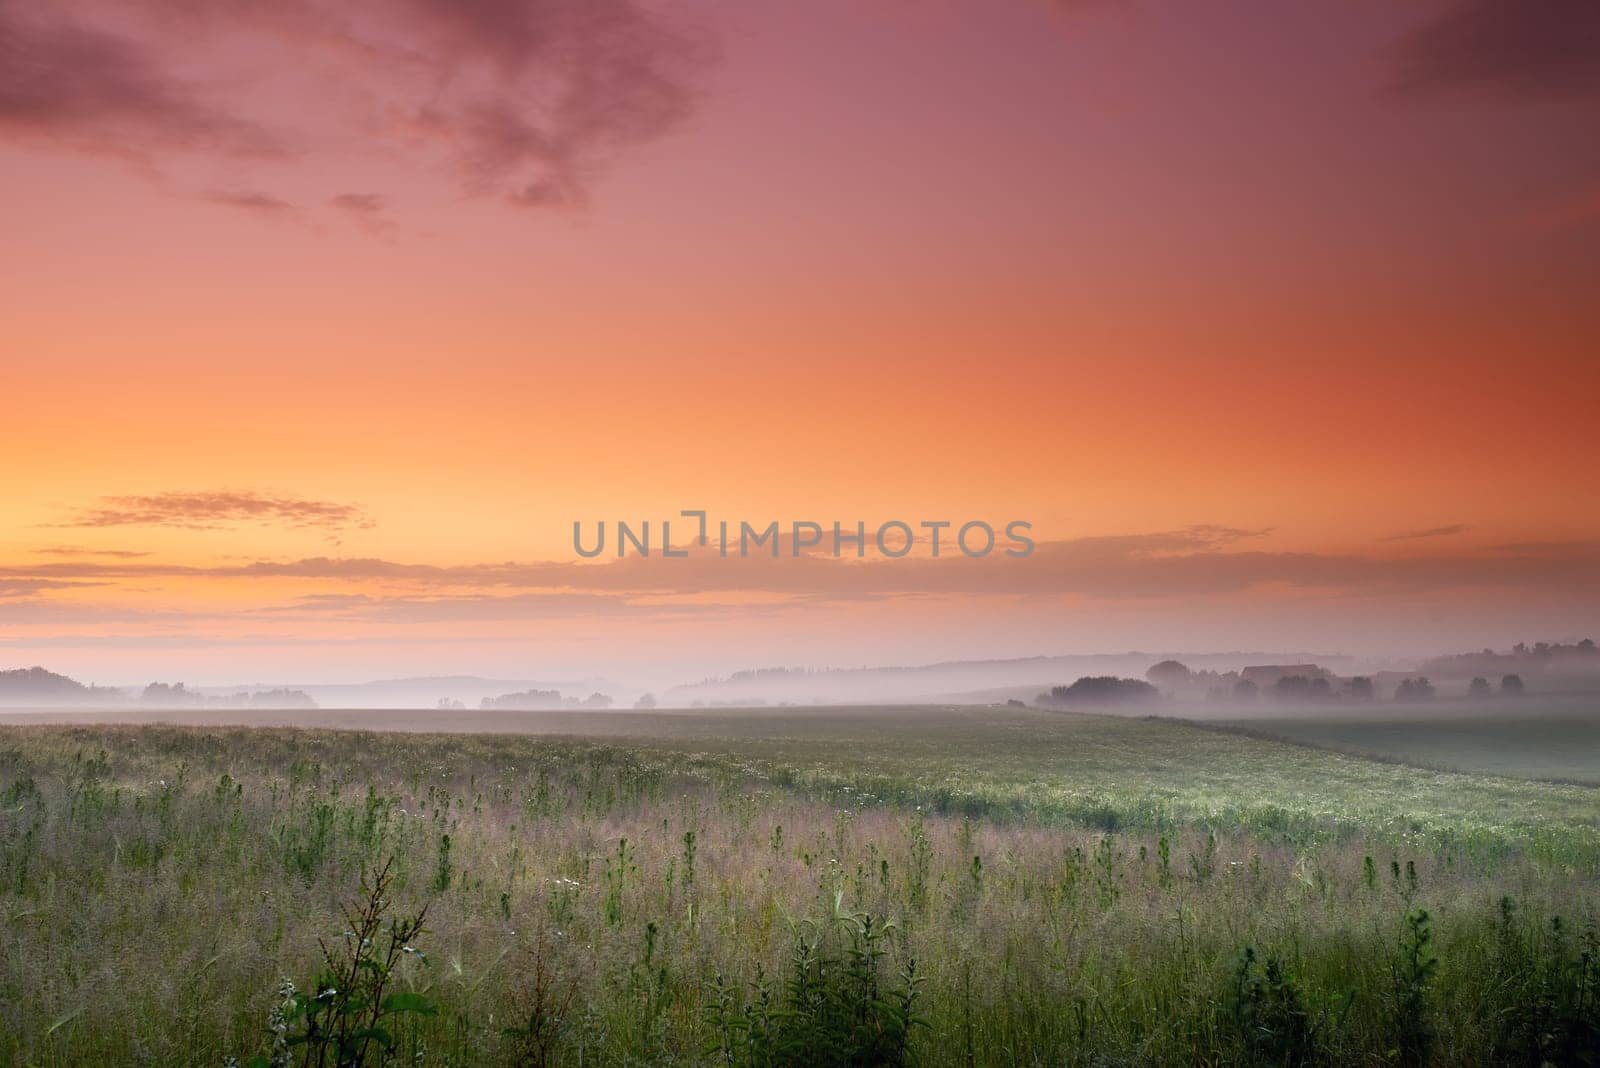 Sunset, nature and green field with mist on mountain, peace and plants in countryside in sustainable environment. Outdoor, travel and landscape of meadow in denmark and hiking destination for tourist.